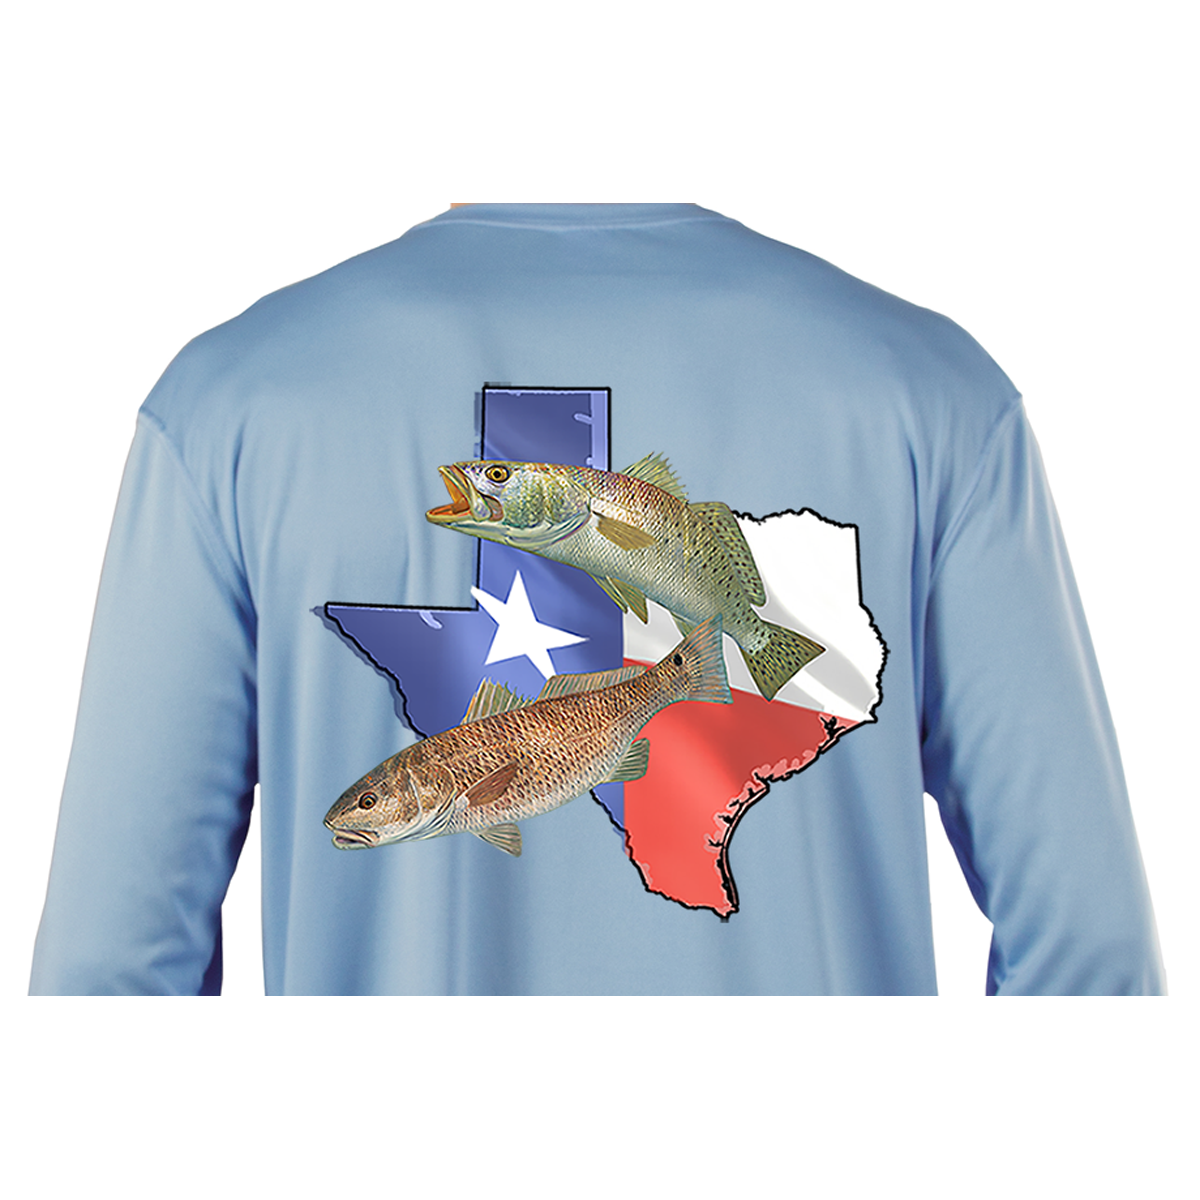 Texas Redfish & Trout Fishing Shirt with Texas State Flag Sleeve - Skiff Life